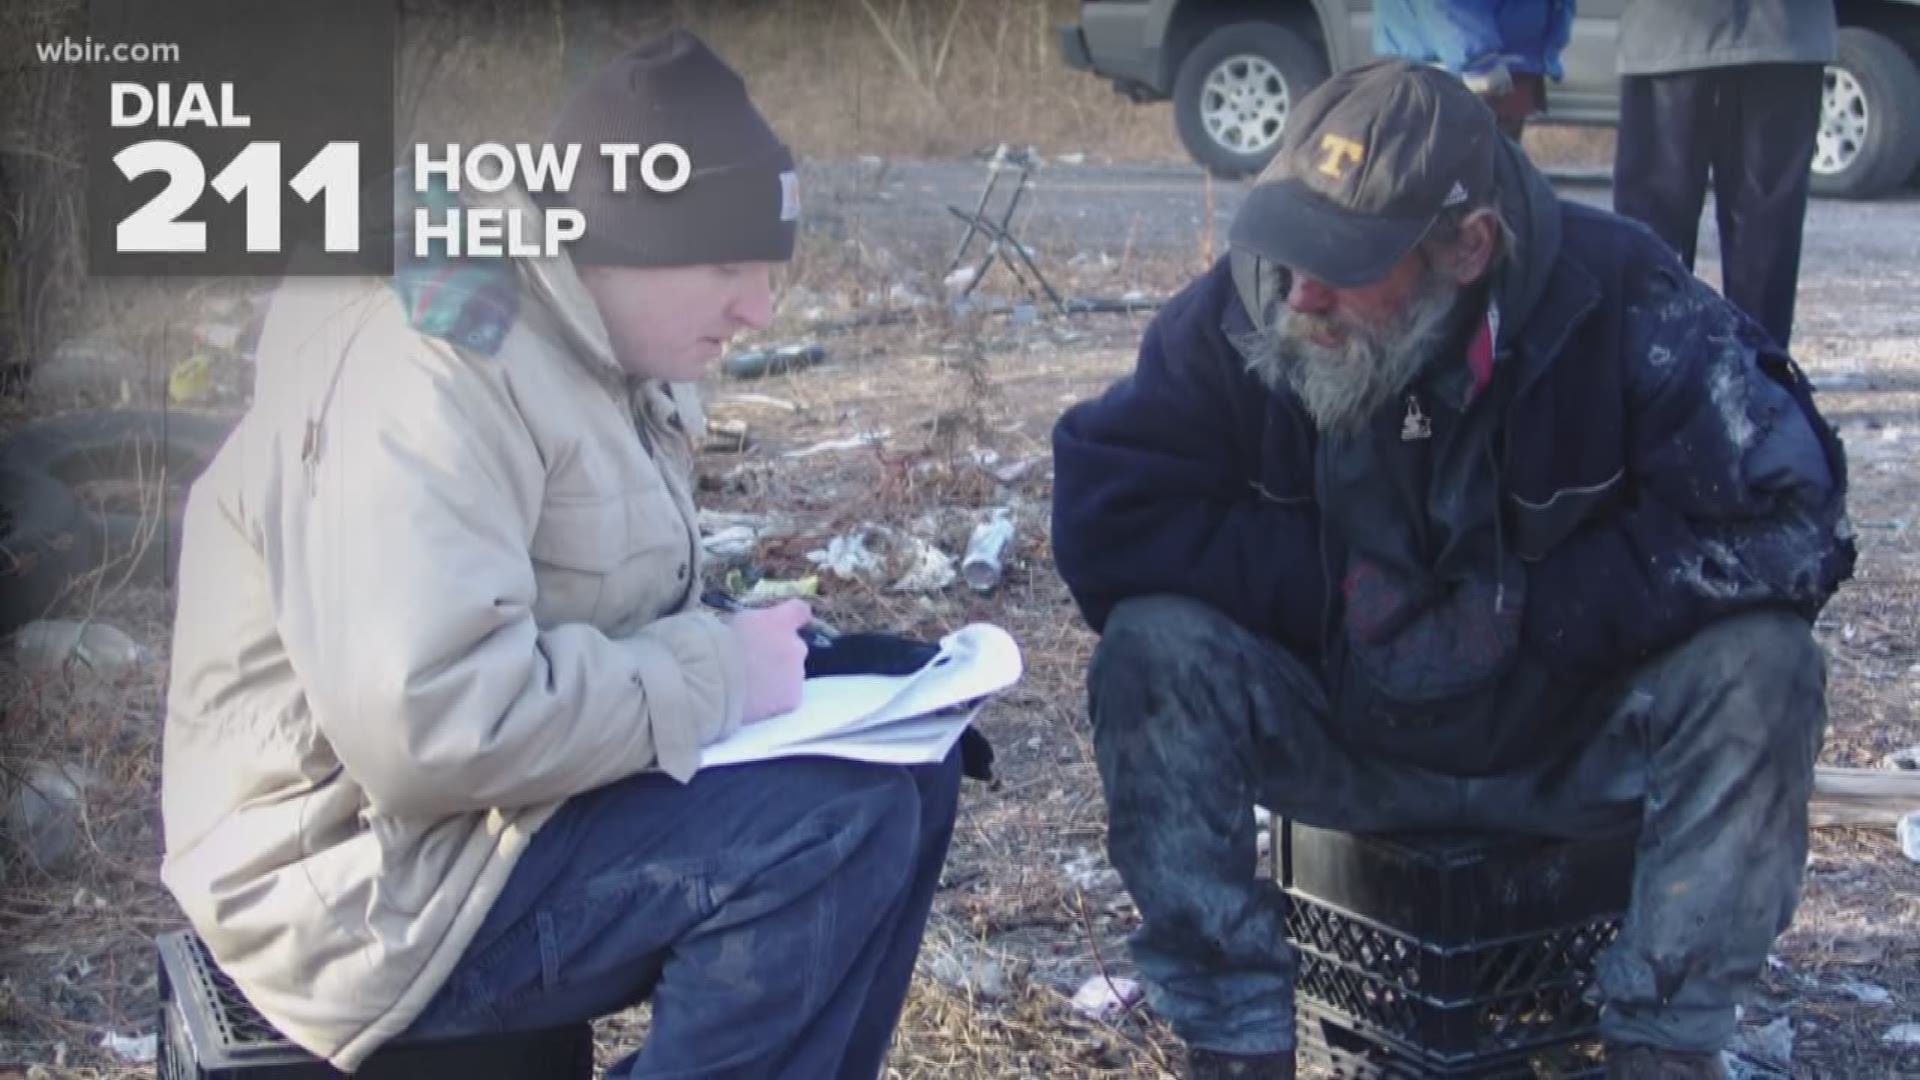 We are taking a closer look at the number of homeless people in Knoxville, the problems they face, and why it's so hard to help. This is part 1 of 3.